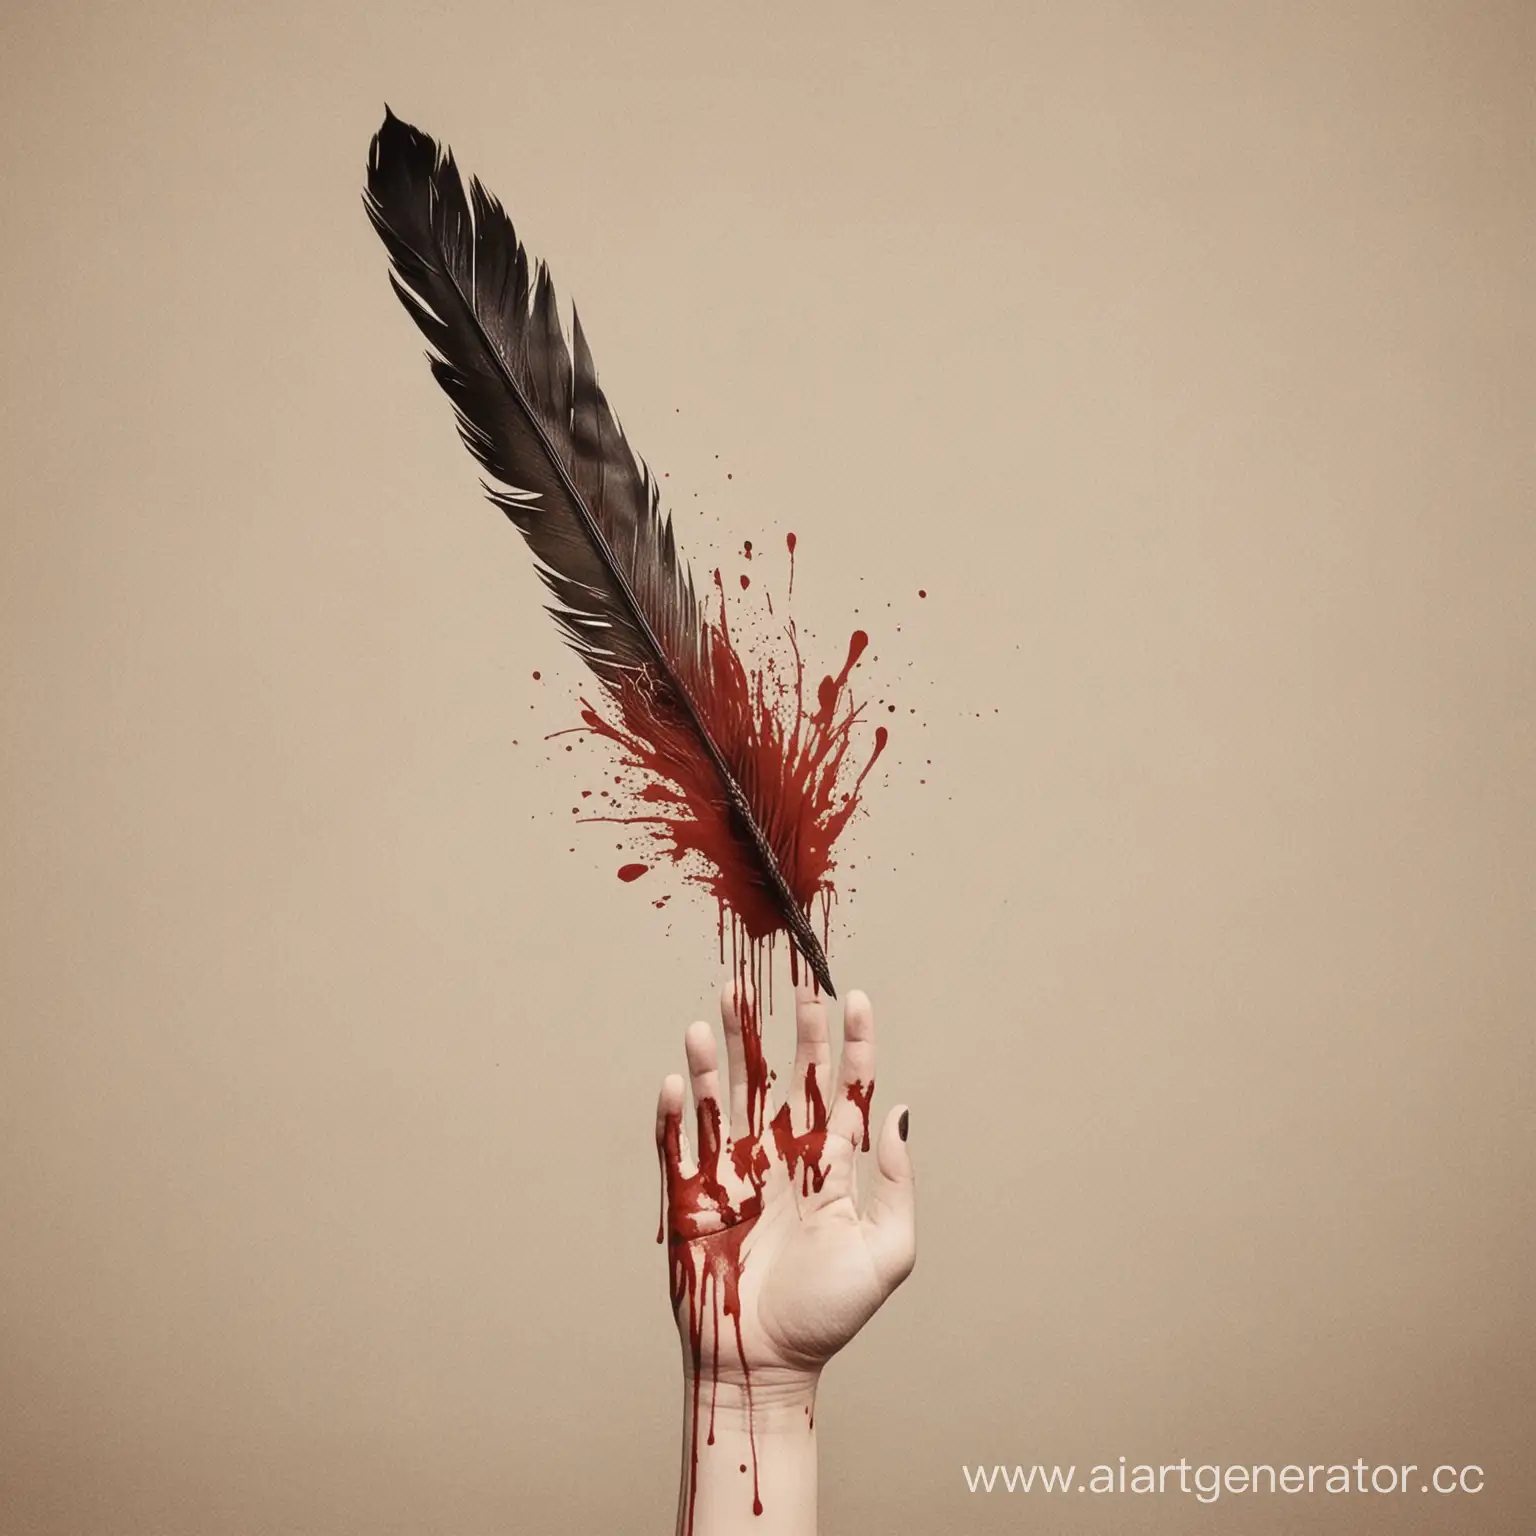 Bloody-Severed-Hand-Holding-Goose-Feather-for-Writing